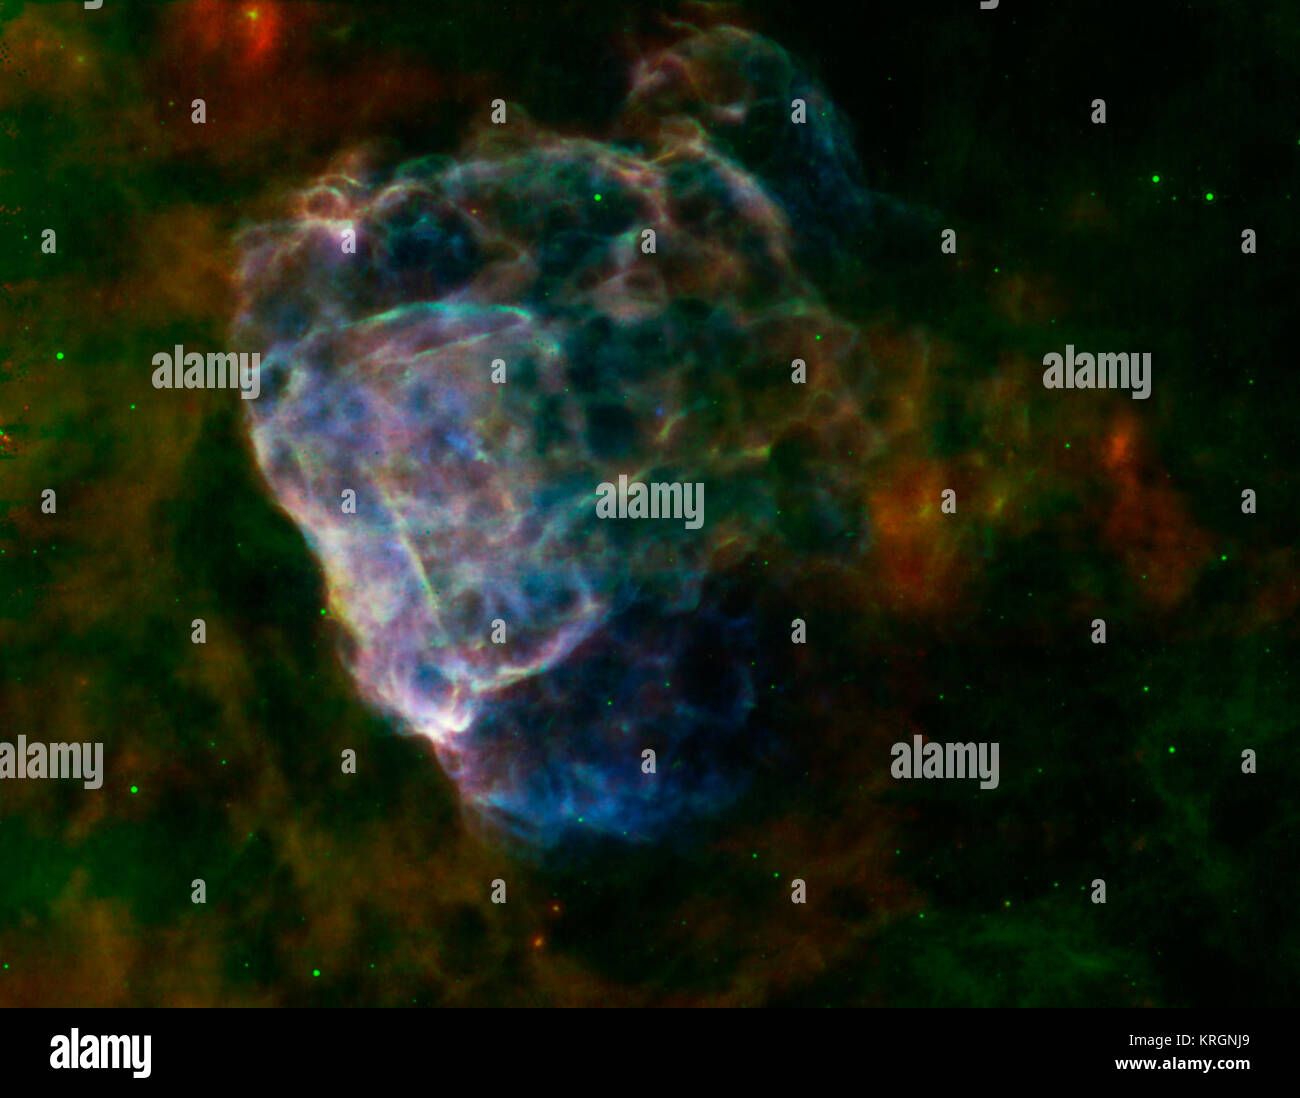 The destructive results of a mighty supernova explosion reveal themselves in a delicate blend of infrared and X-ray light, as seen in this image from NASA’s Spitzer Space Telescope and Chandra X-Ray Observatory, and the European Space Agency's XMM-Newton.   The bubbly cloud is an irregular shock wave, generated by a supernova that would have been witnessed on Earth 3,700 years ago. The remnant itself, called Puppis A, is around 7,000 light-years away, and the shock wave is about 10 light-years across.  The pastel hues in this image reveal that the infrared and X-ray structures trace each other Stock Photo